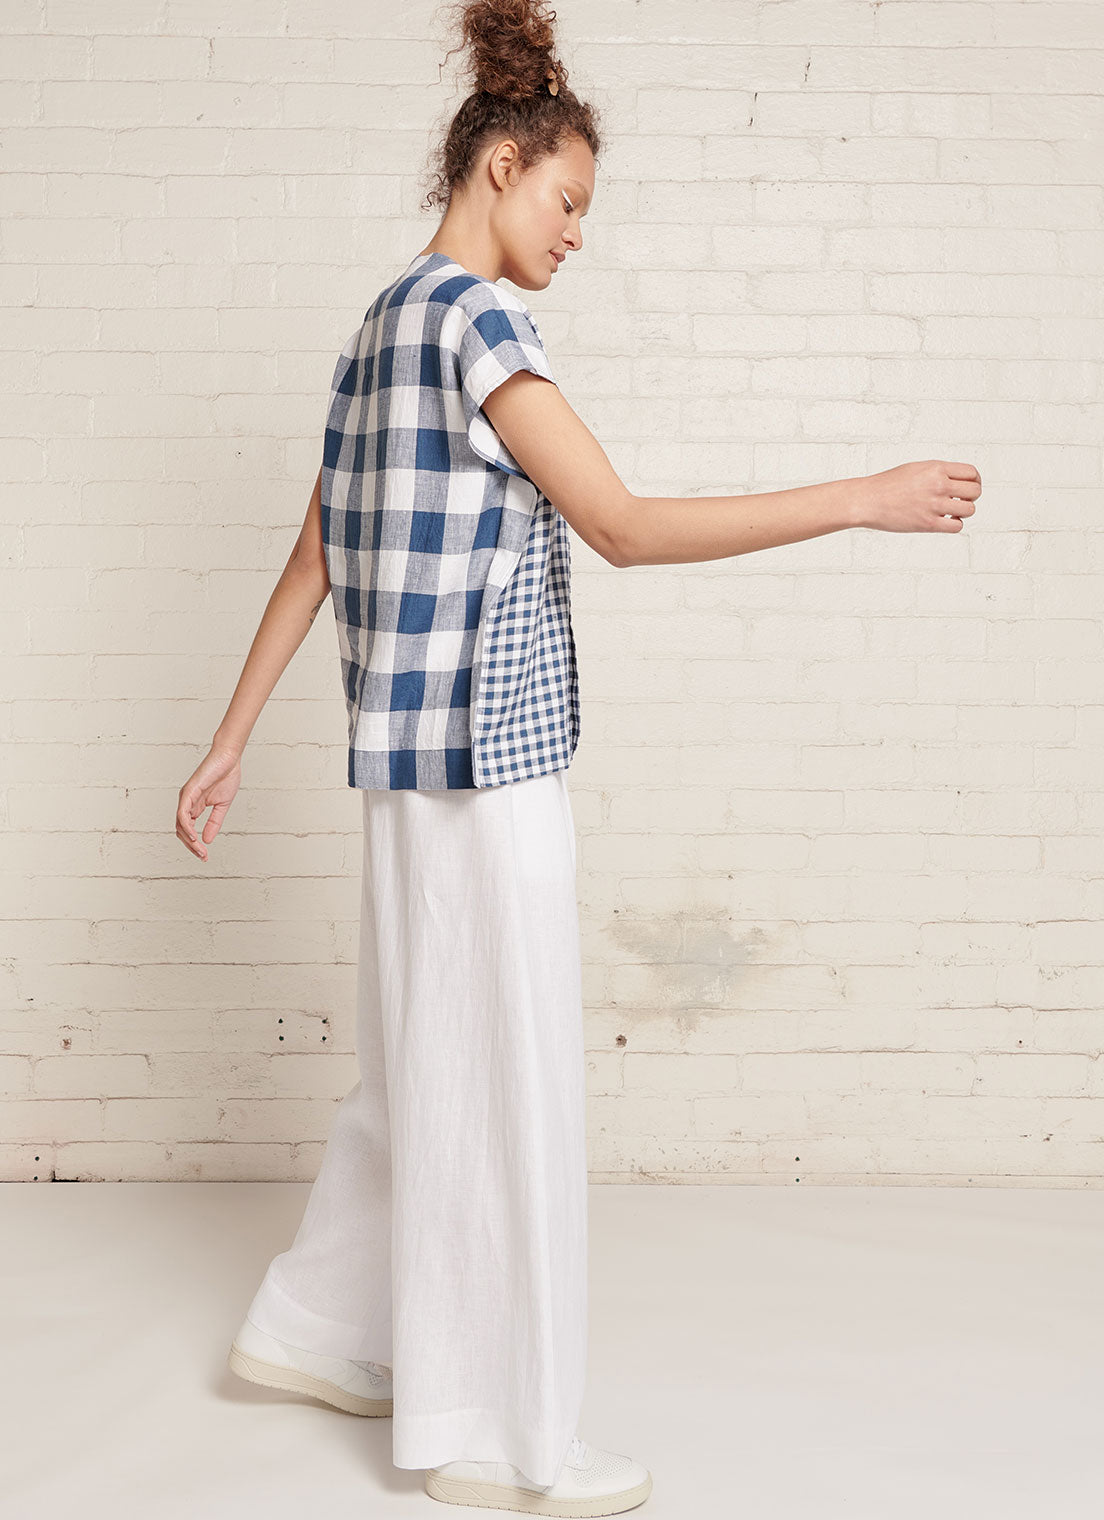 An indigo and white gingham, square cut linen top with short sleeves, open V neckline and centre front pleat detail made from mixed gingham yarn dye washed linen